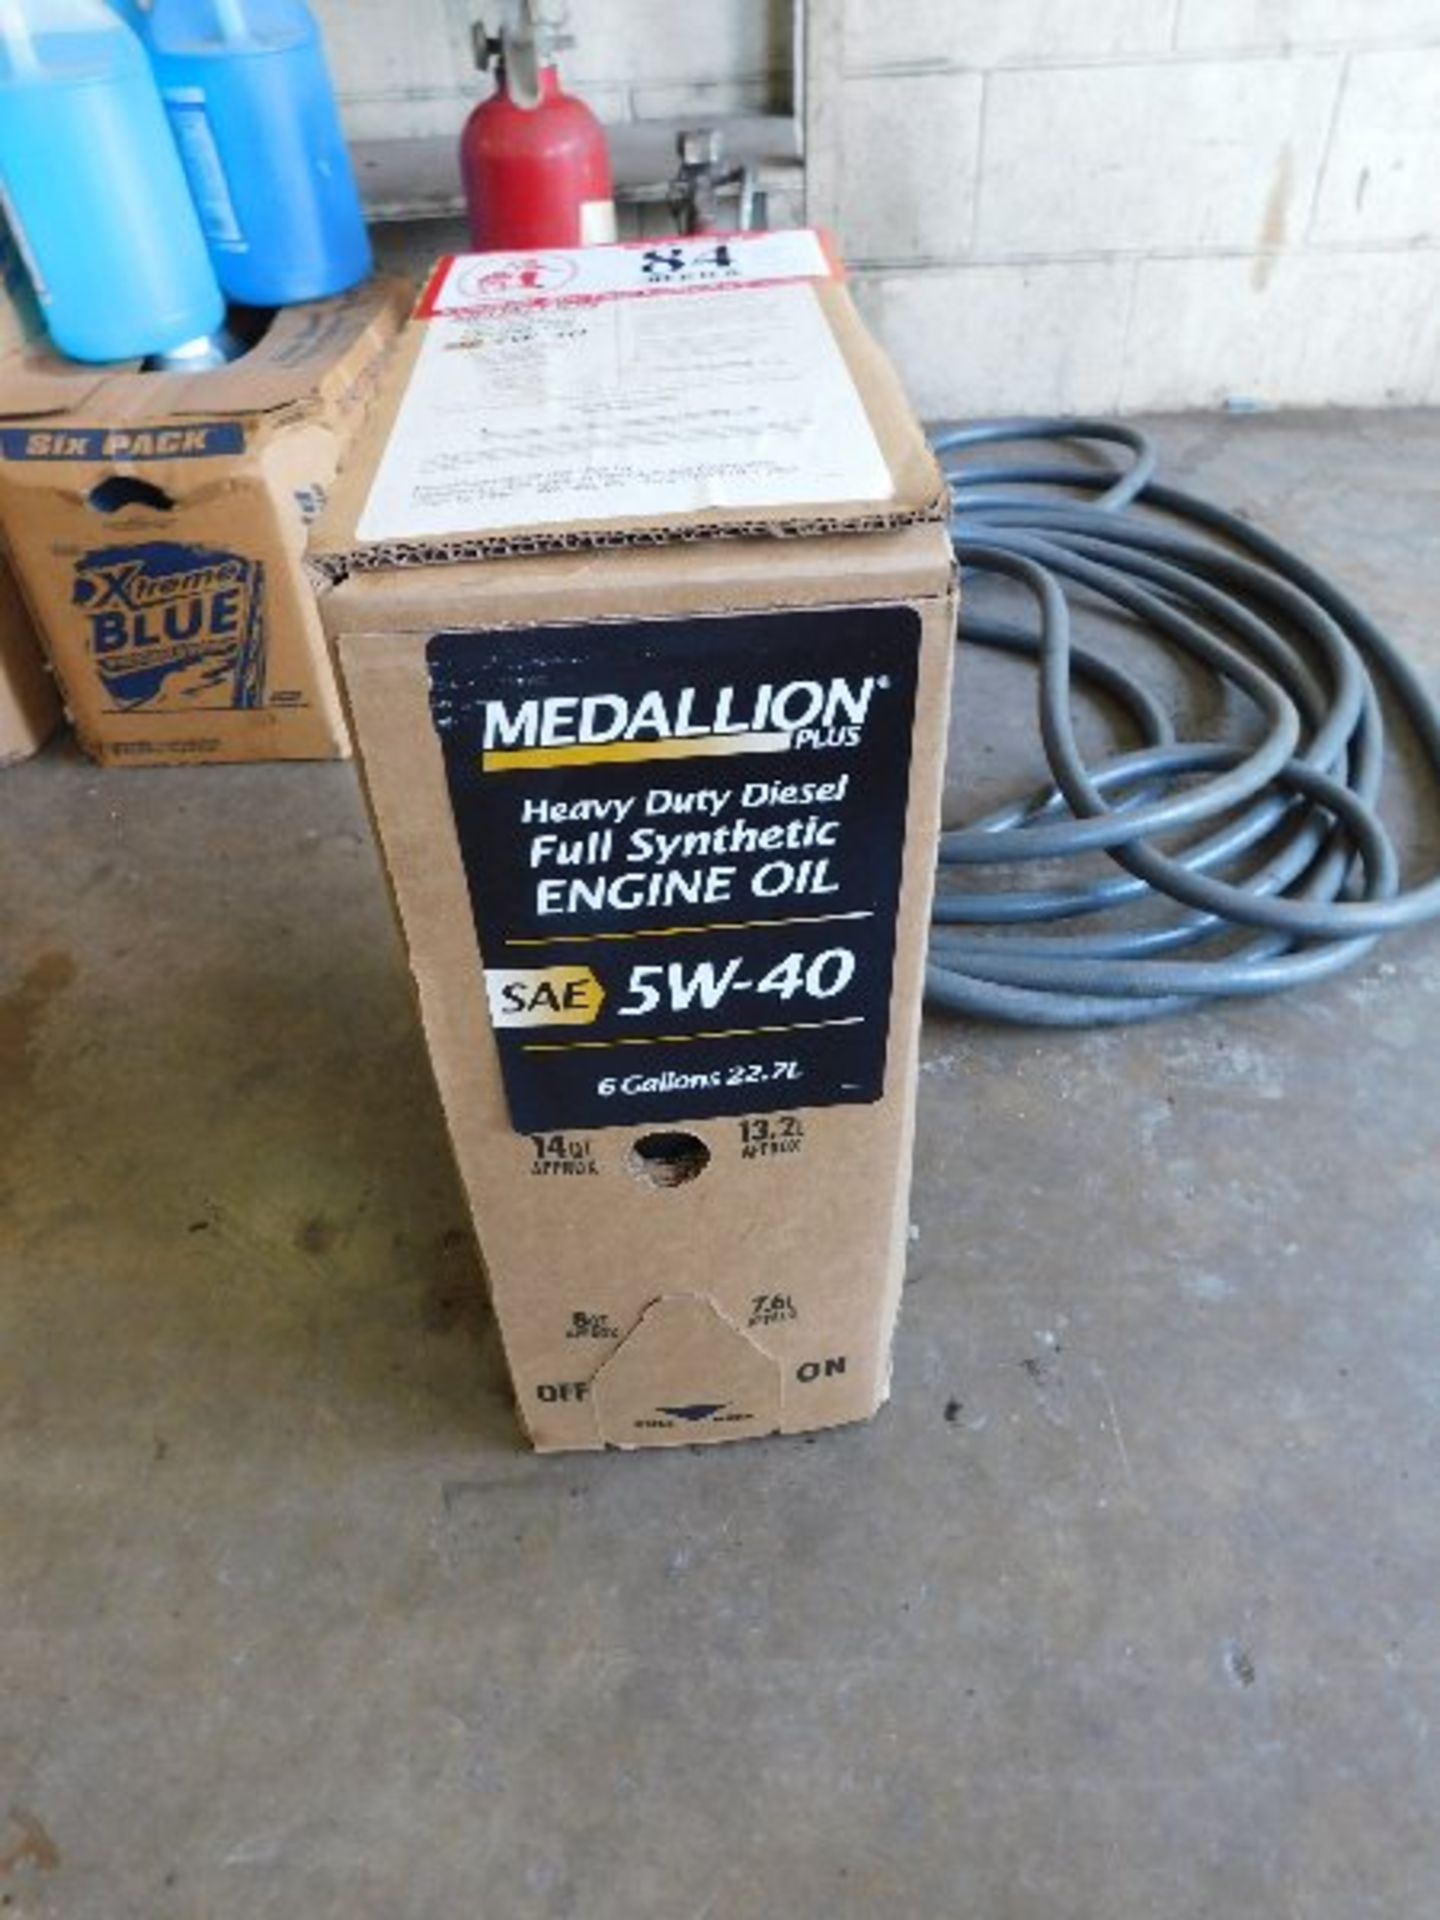 Medallion Plus Heavy Duty Synthetic Diesel Engine Oil, SA5W-40, (6) Gallons